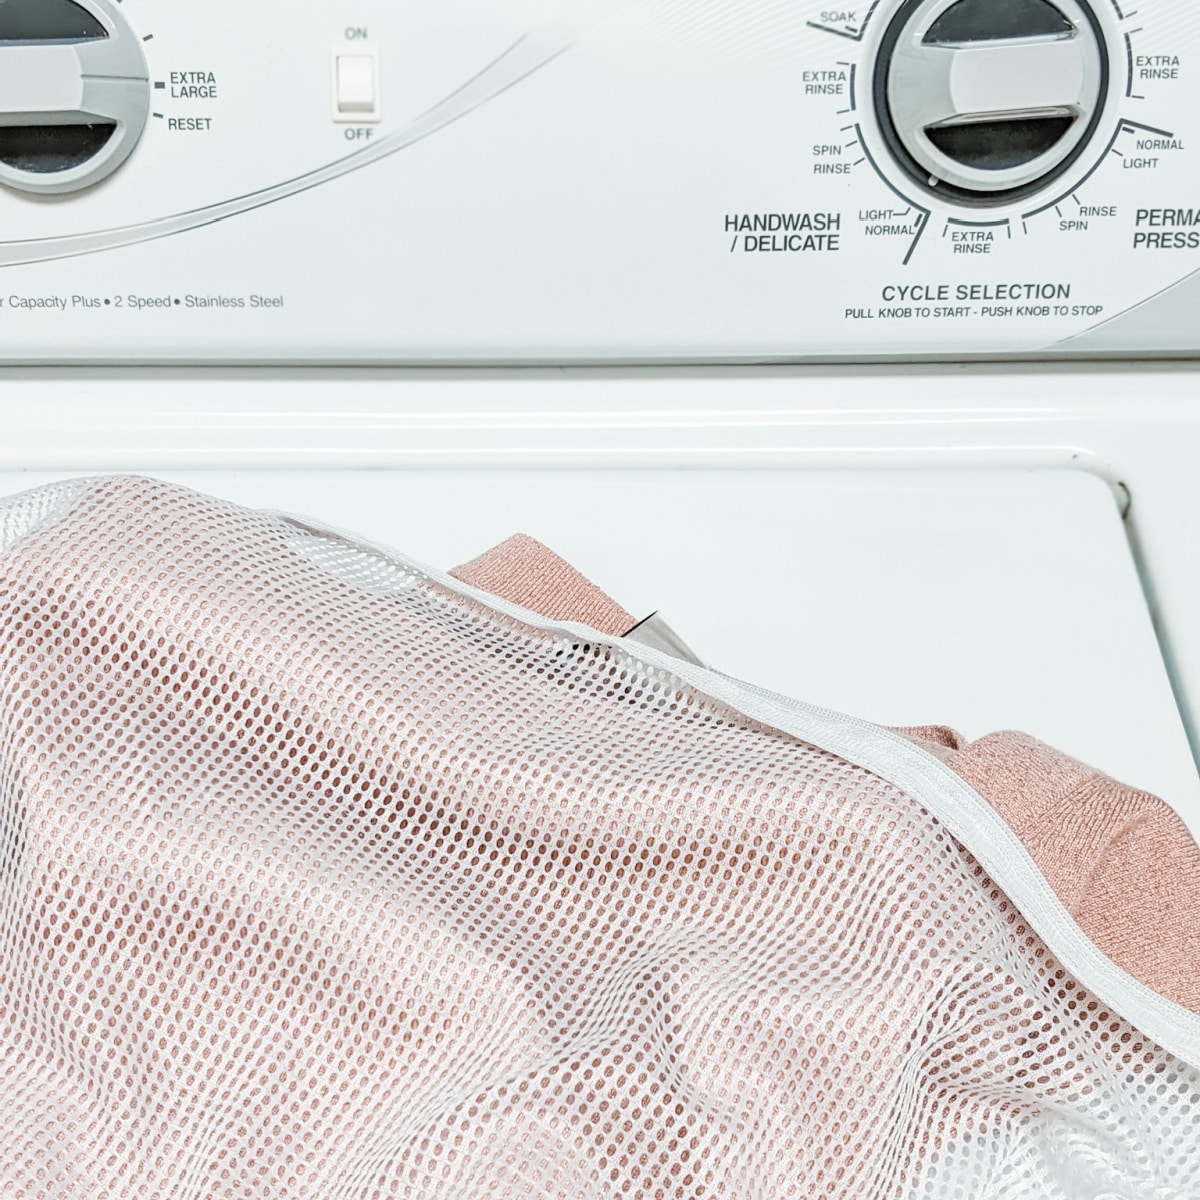 Washing Dry Cleaning at Home - Frugally Blonde